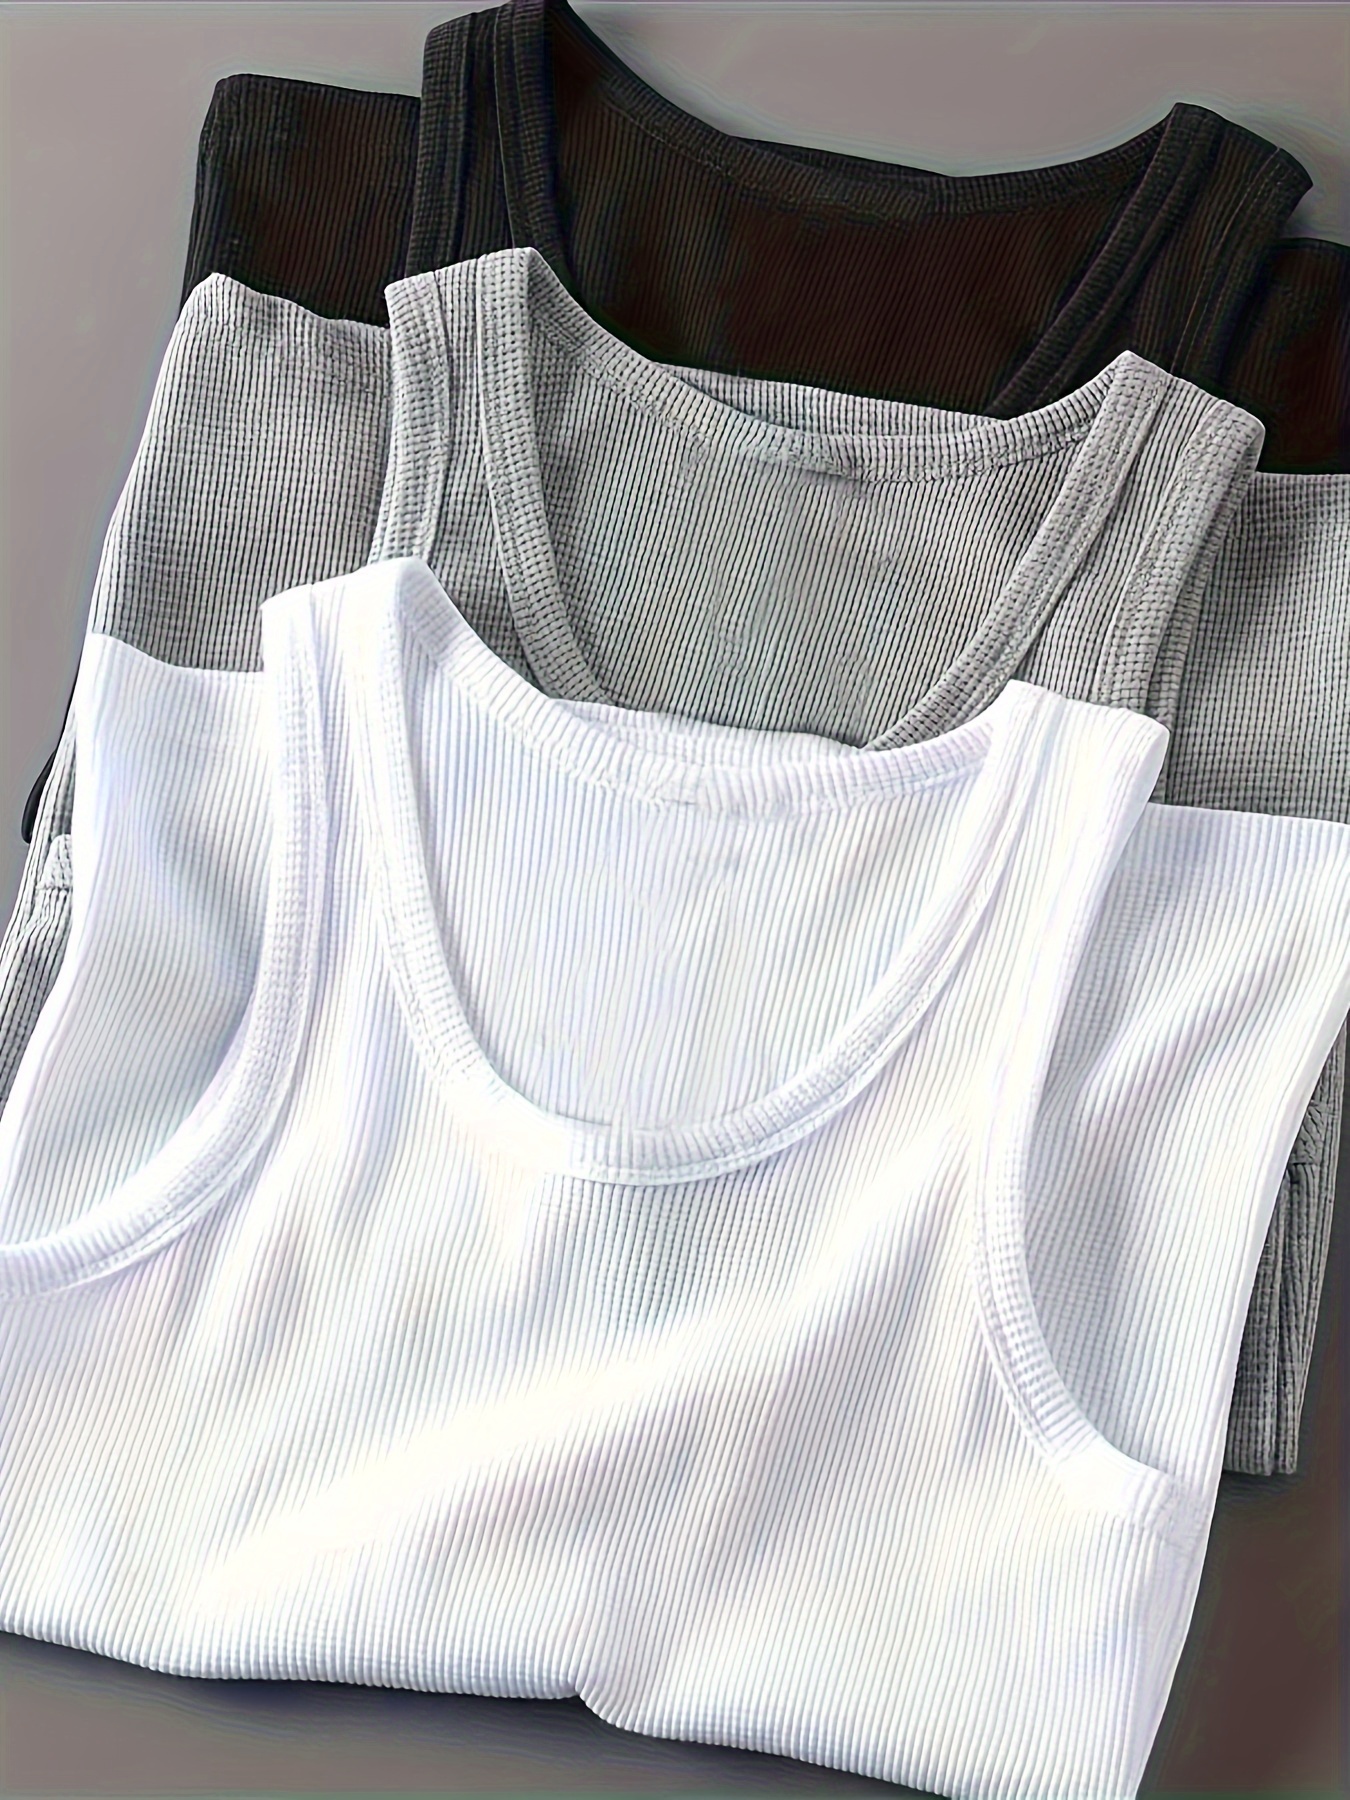 mens solid tank top active quick dry breathable crew neck sleeveless shirt mens clothing for summer outdoor details 4